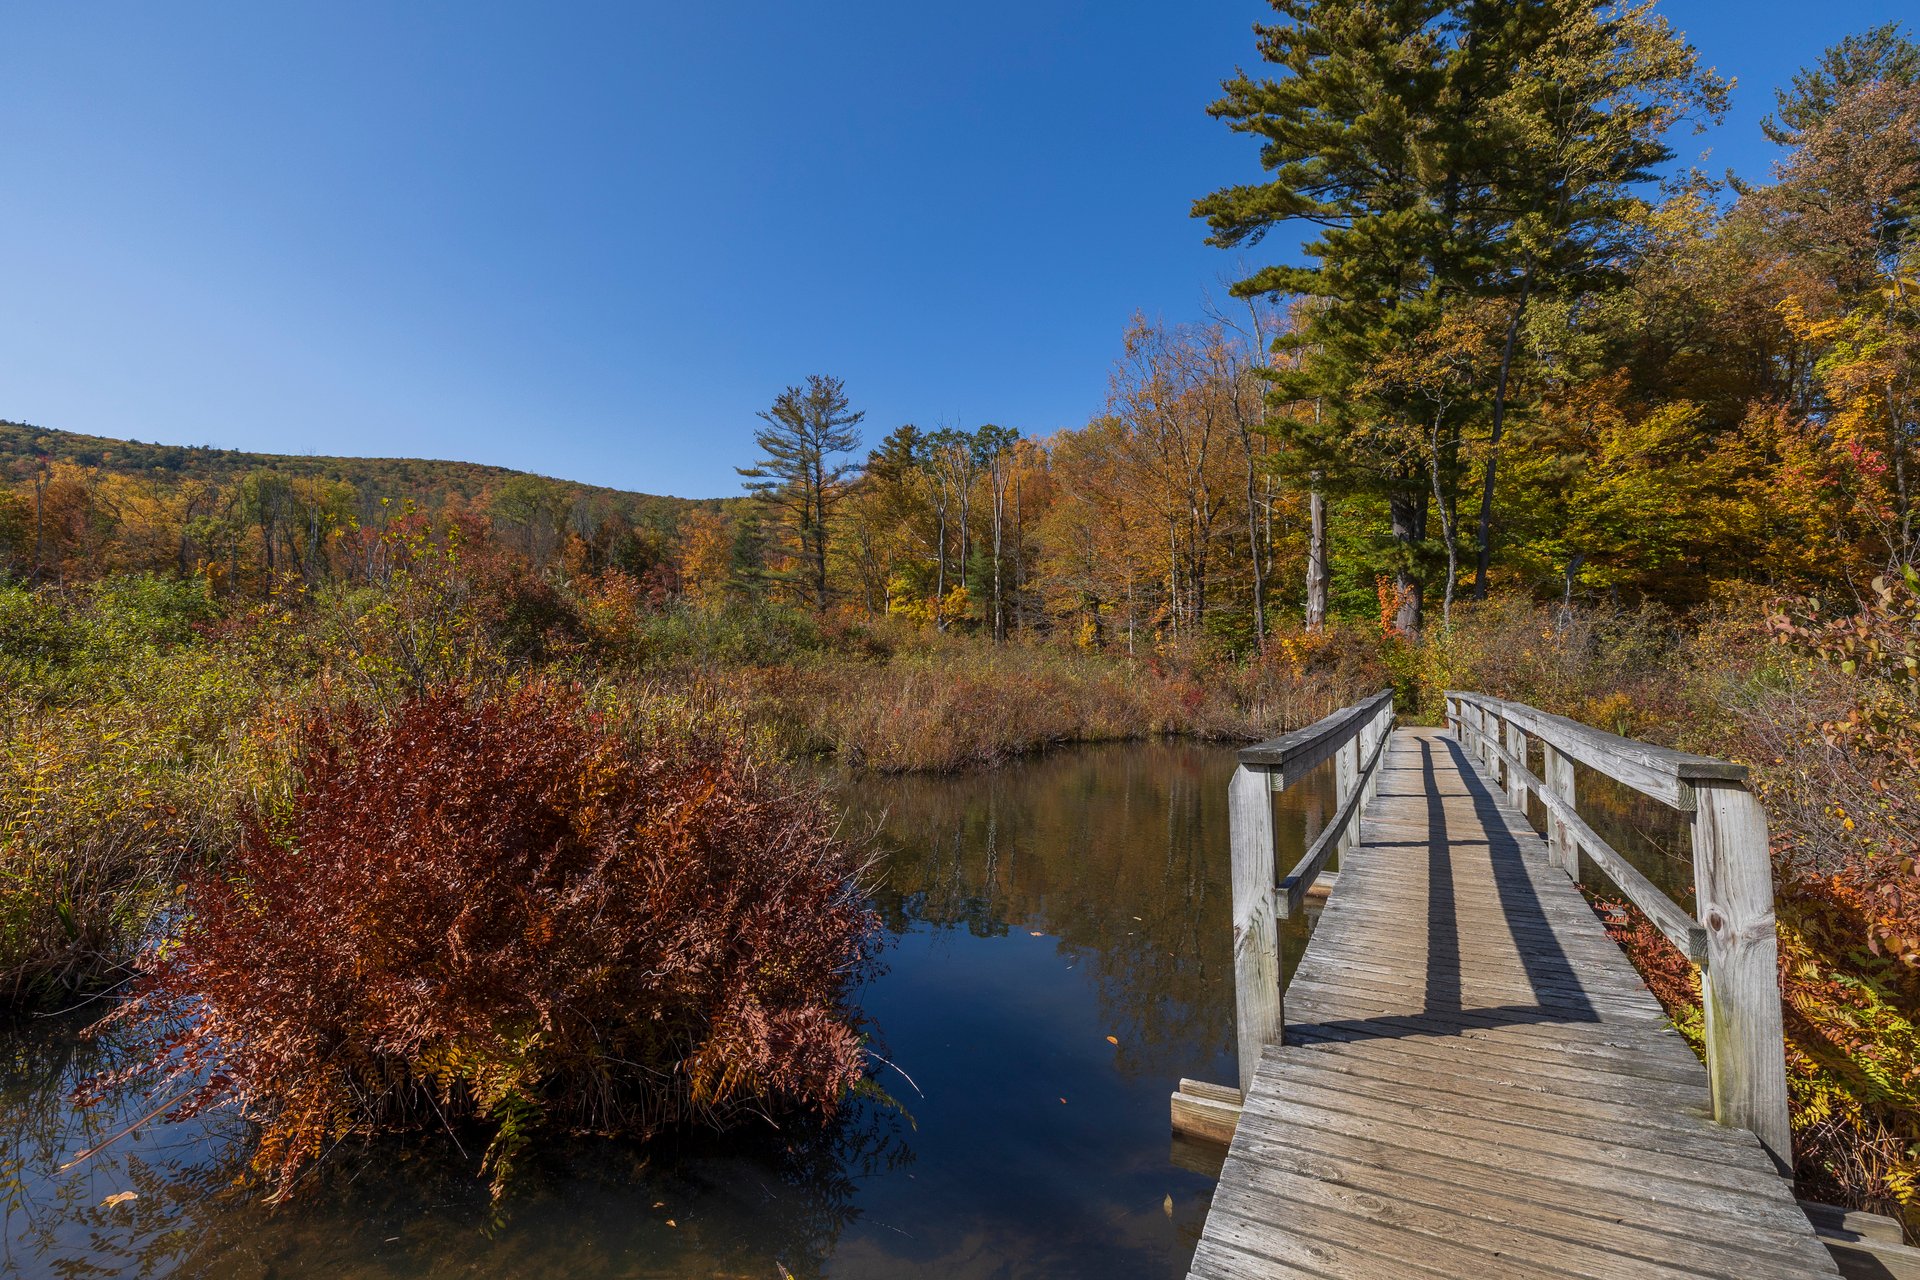 A wooden bridge with rails over a calm, marshy pond. A forest with fall foliage surrounds the pond.